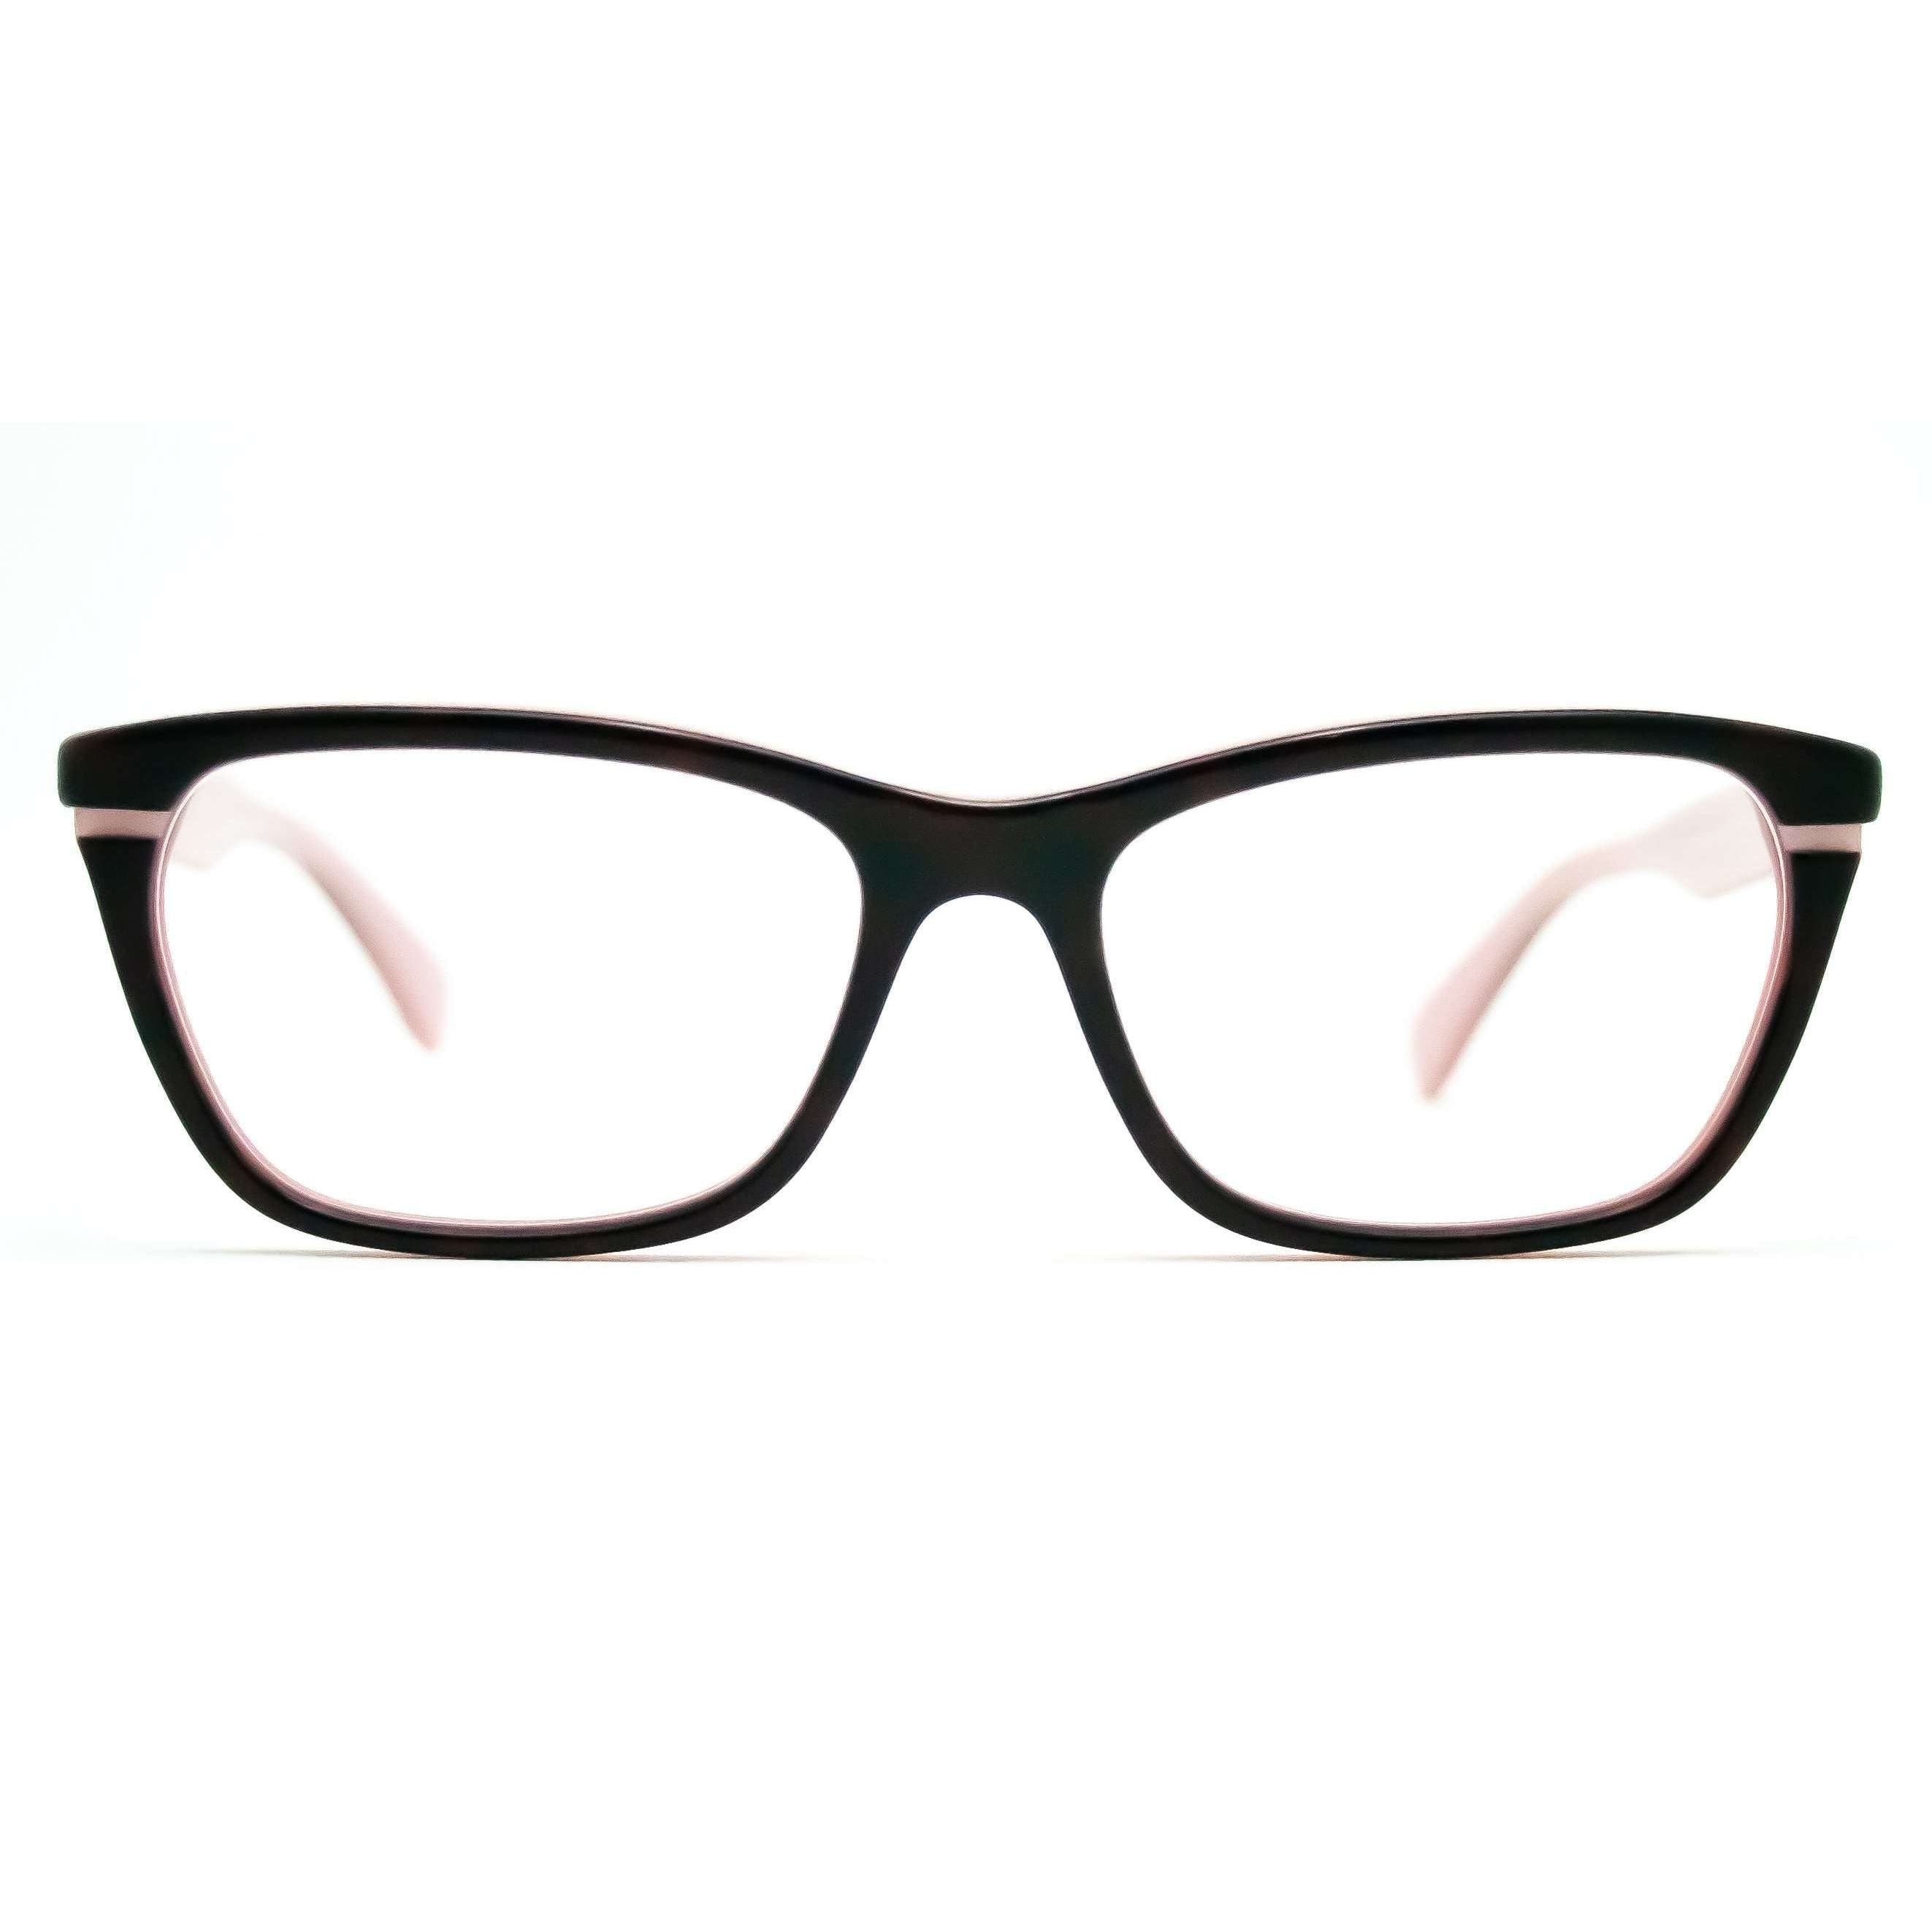 ralph lauren brown fashion frames glasses pink preloved reconditioned  rectangle tortoiseshell womens glasses eyewear – Queen of Specs